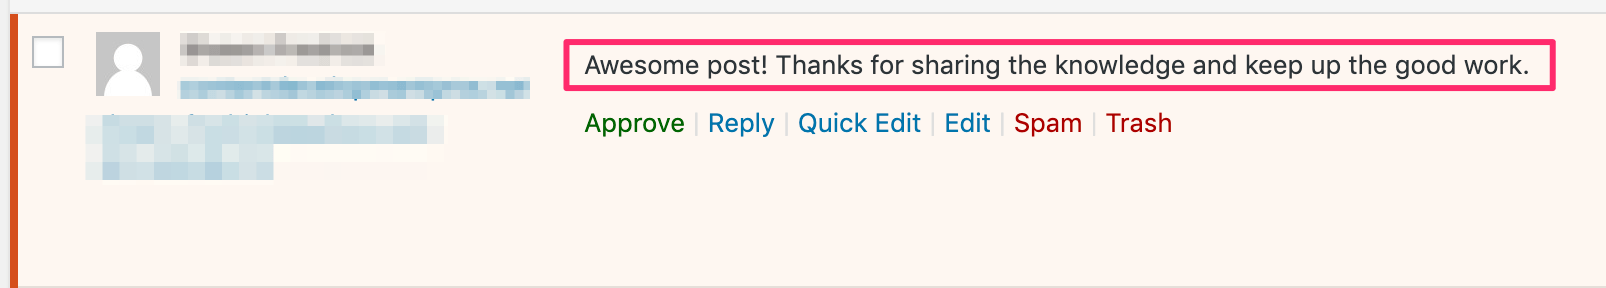 example of comment spam